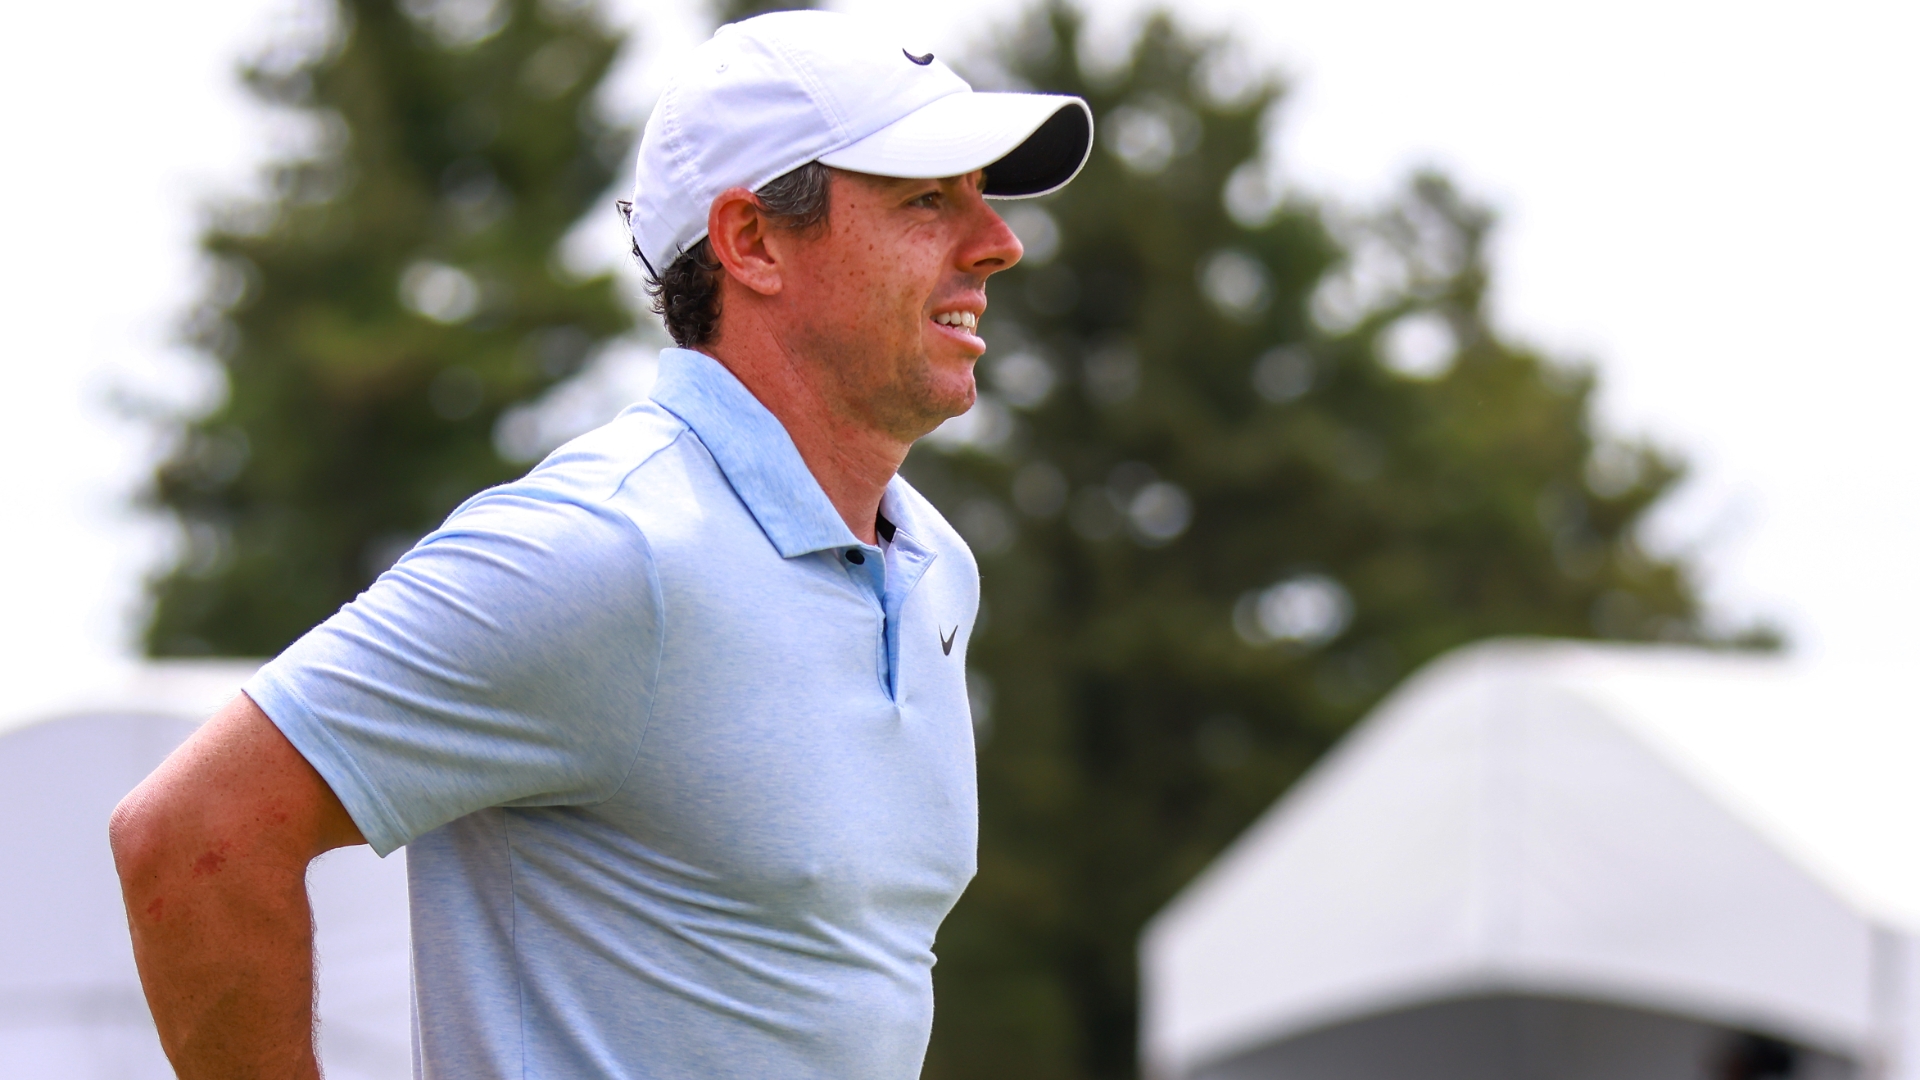 Rory climbs up leaderboard with an eagle